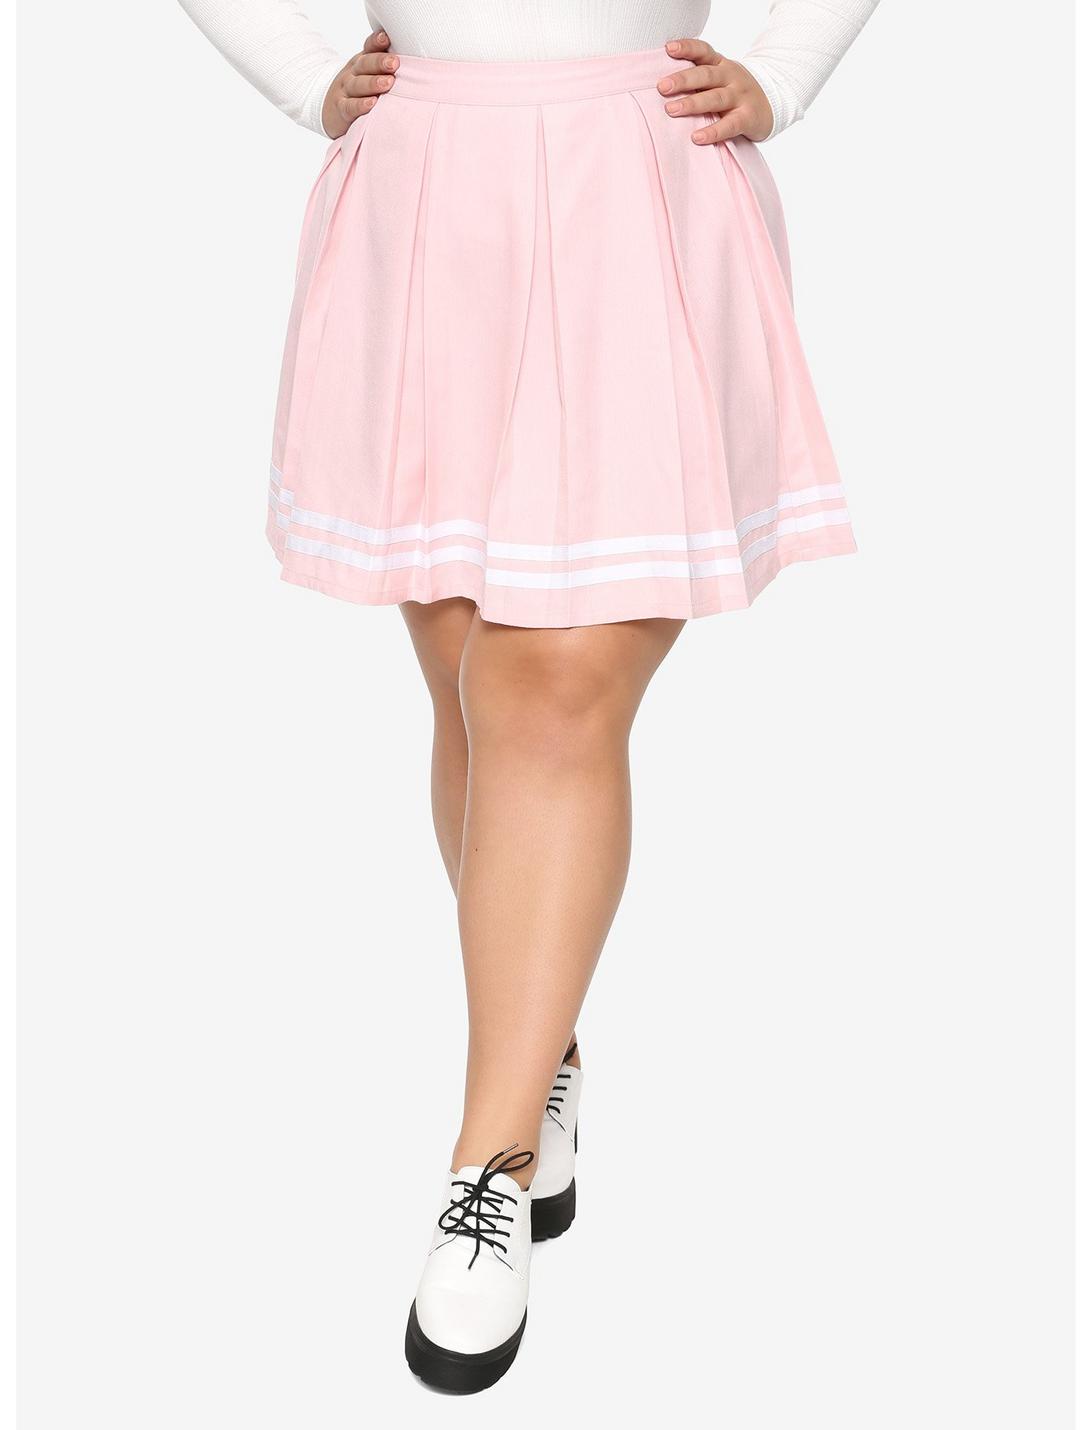 Pink Pleated Cheer Skirt Plus Size, LIGHT PINK, hi-res